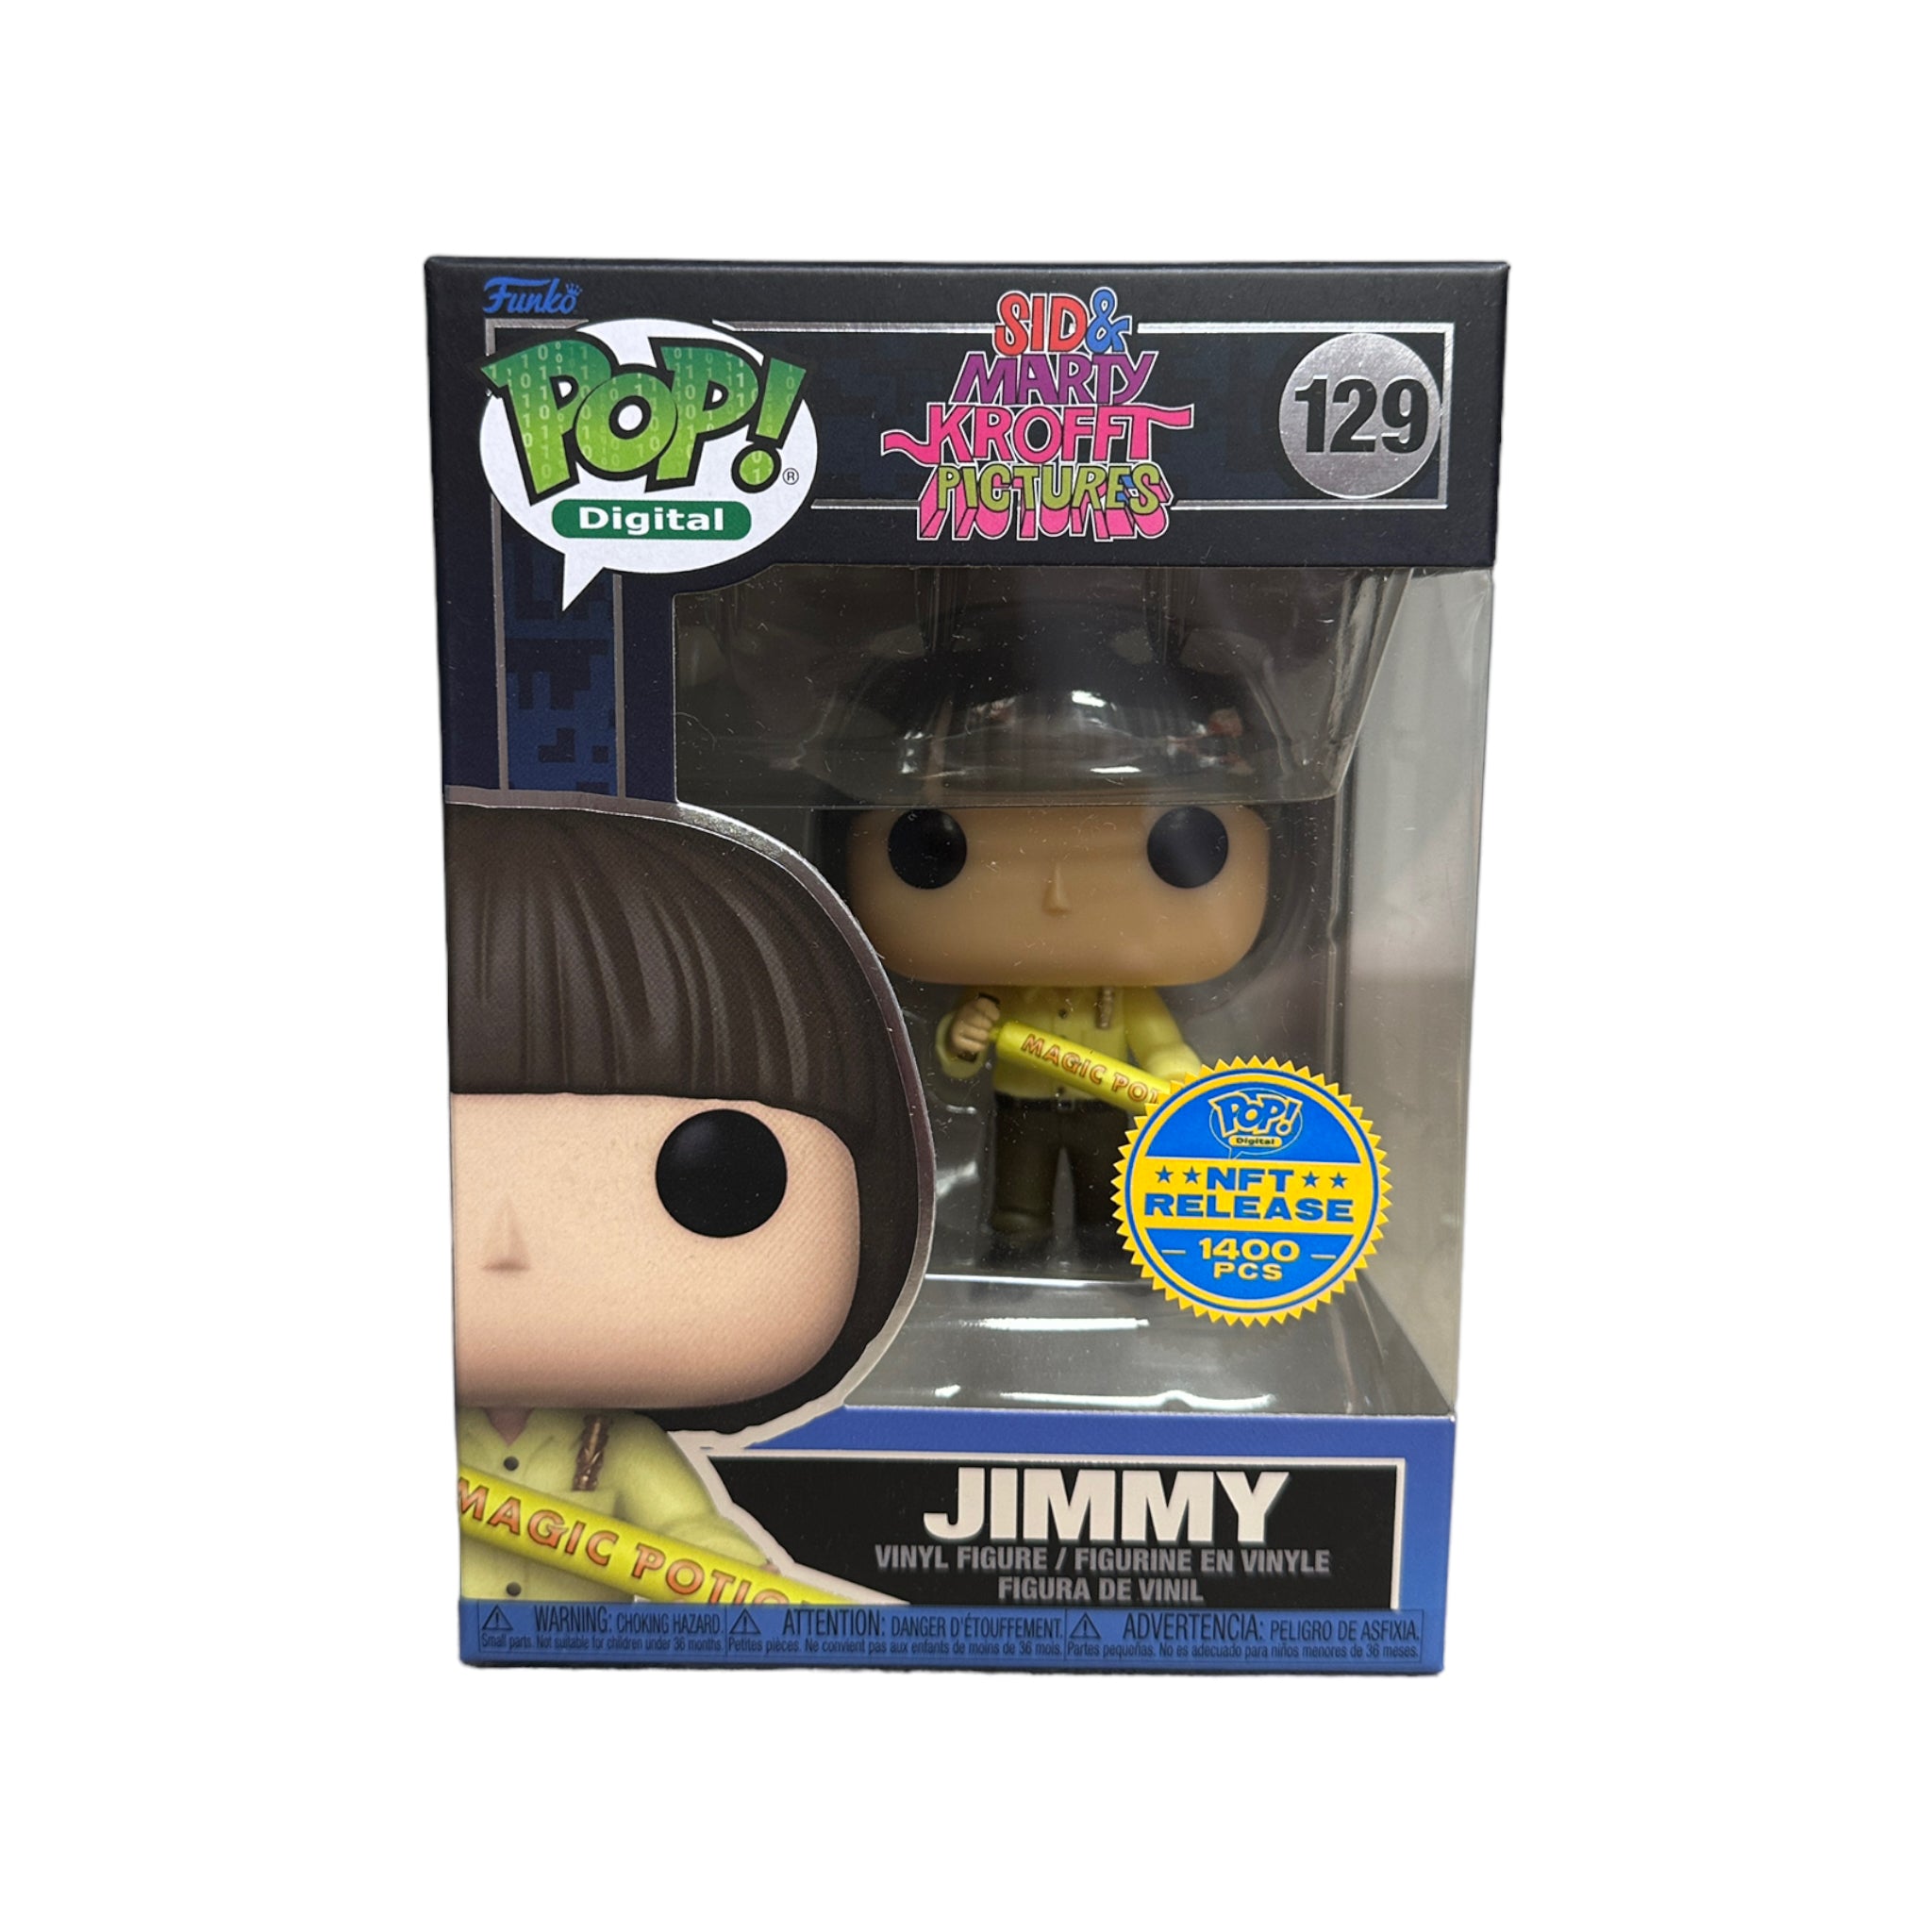 Jimmy #129 Funko Pop! - Sid & Marty Krofft Pictures - NFT Release Exclusive LE1400 Pcs - Condition 8.75/10